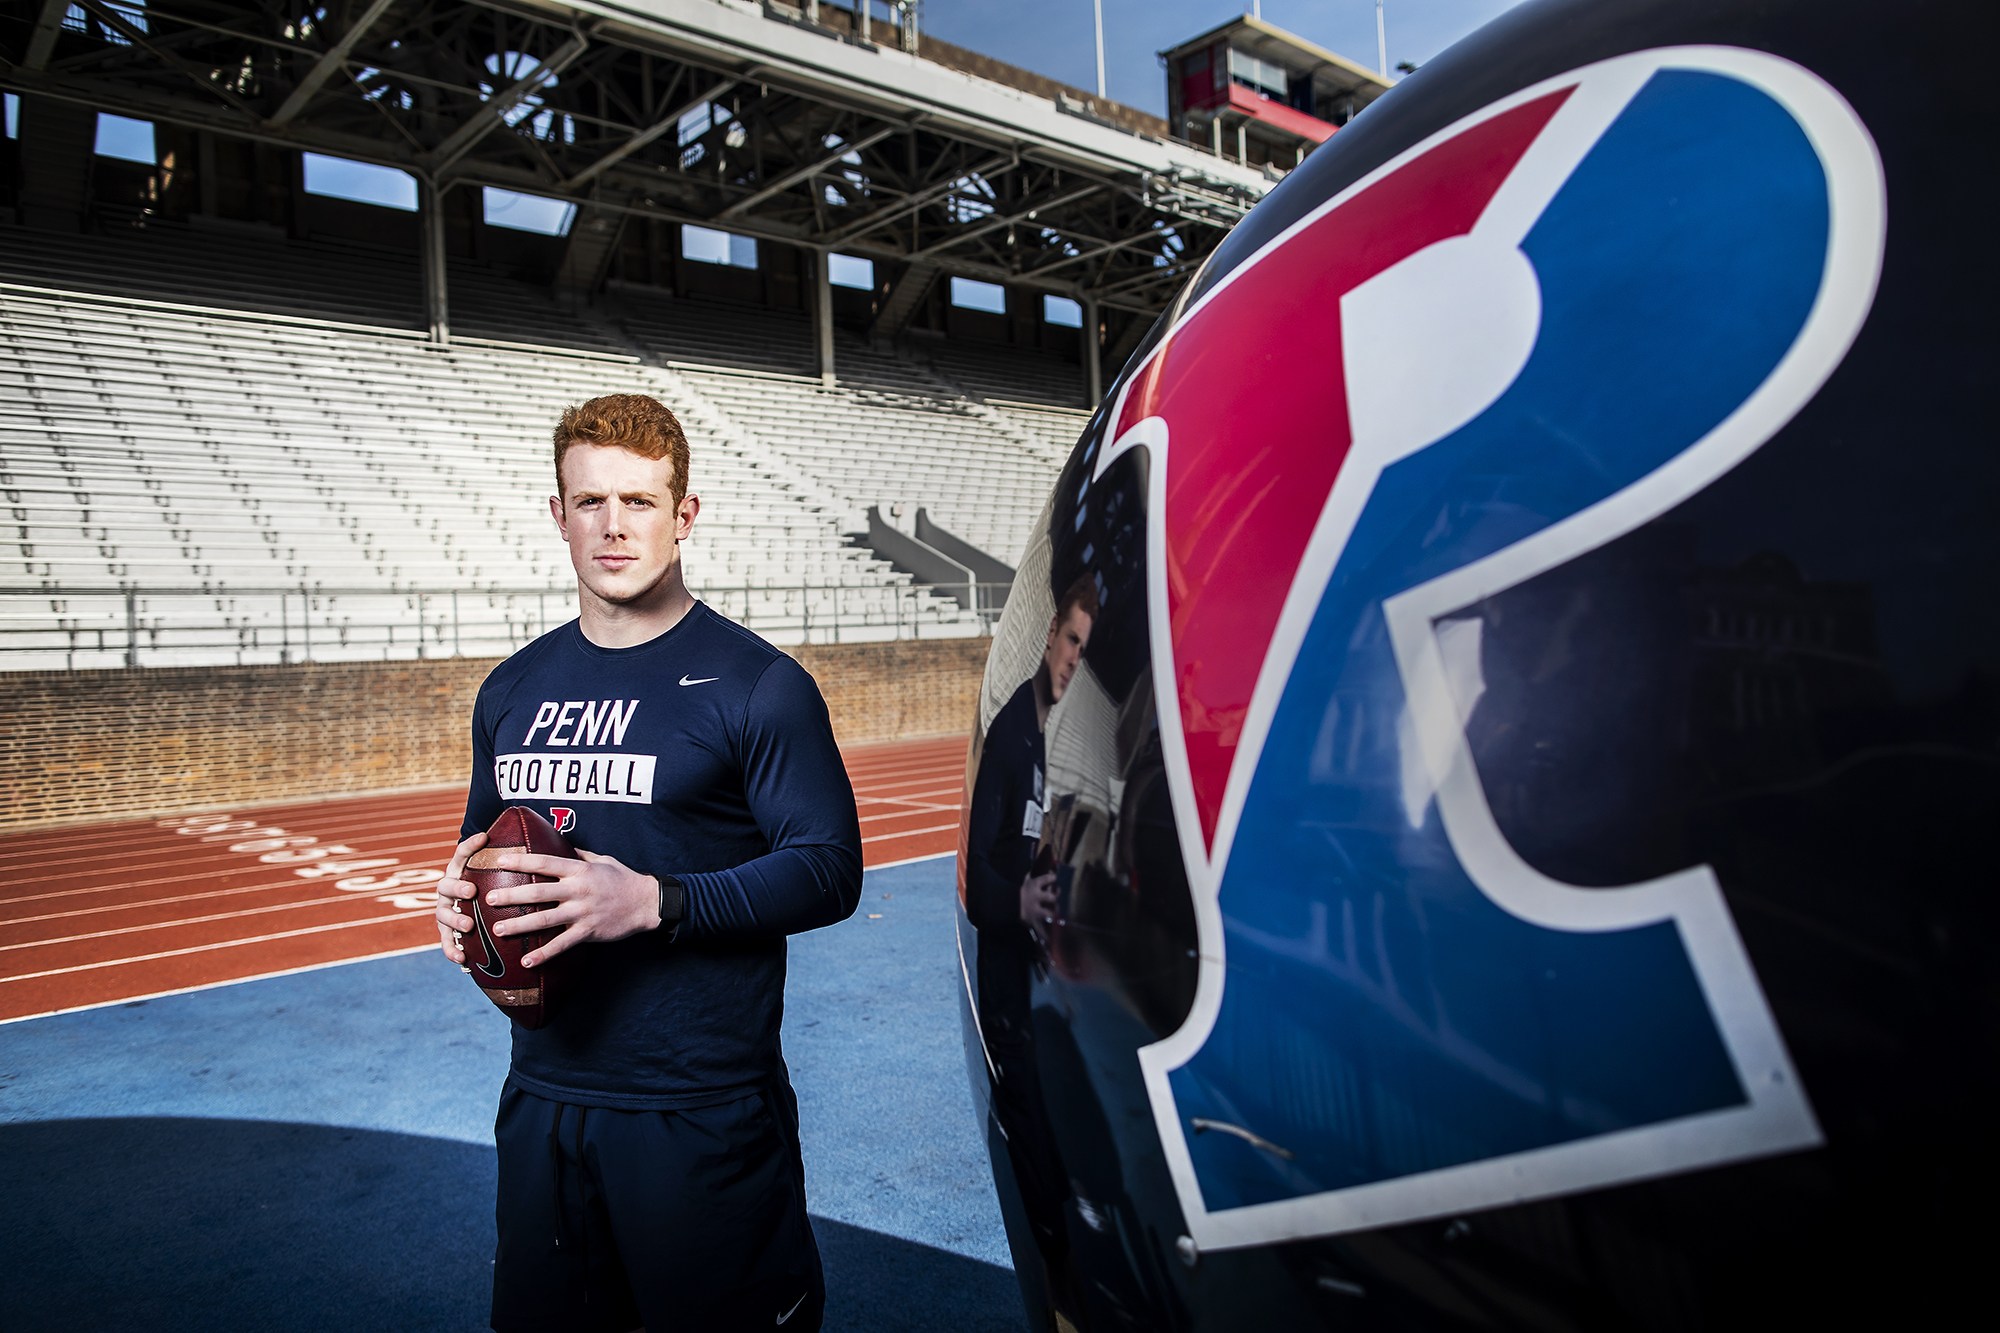 Brian O'Neill holds a football while standing next to a football helmet at Franklin Field.